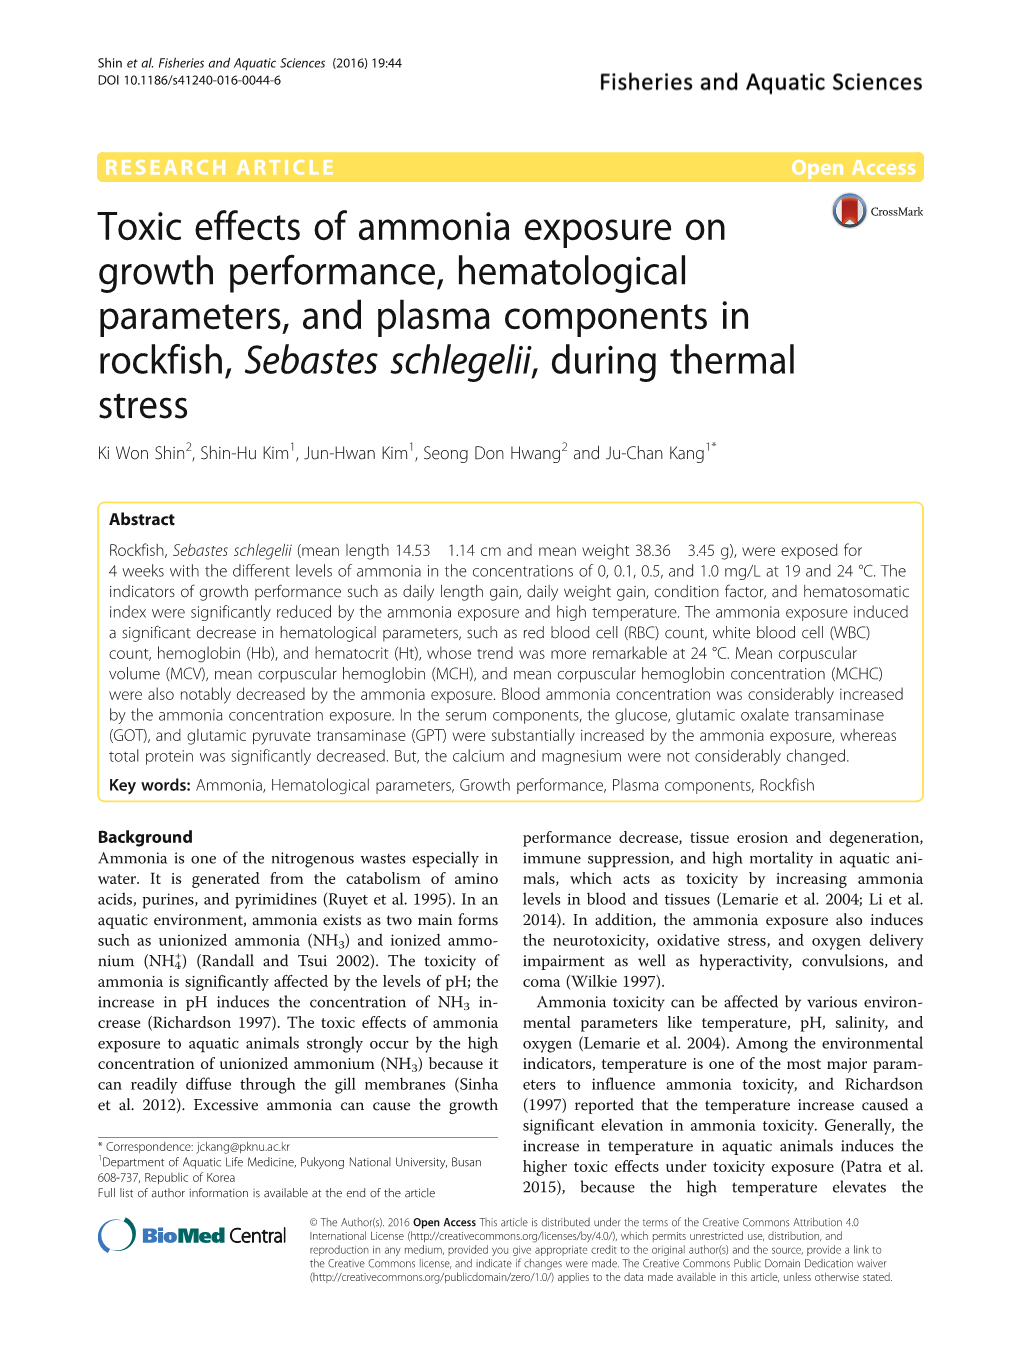 Toxic Effects of Ammonia Exposure on Growth Performance, Hematological